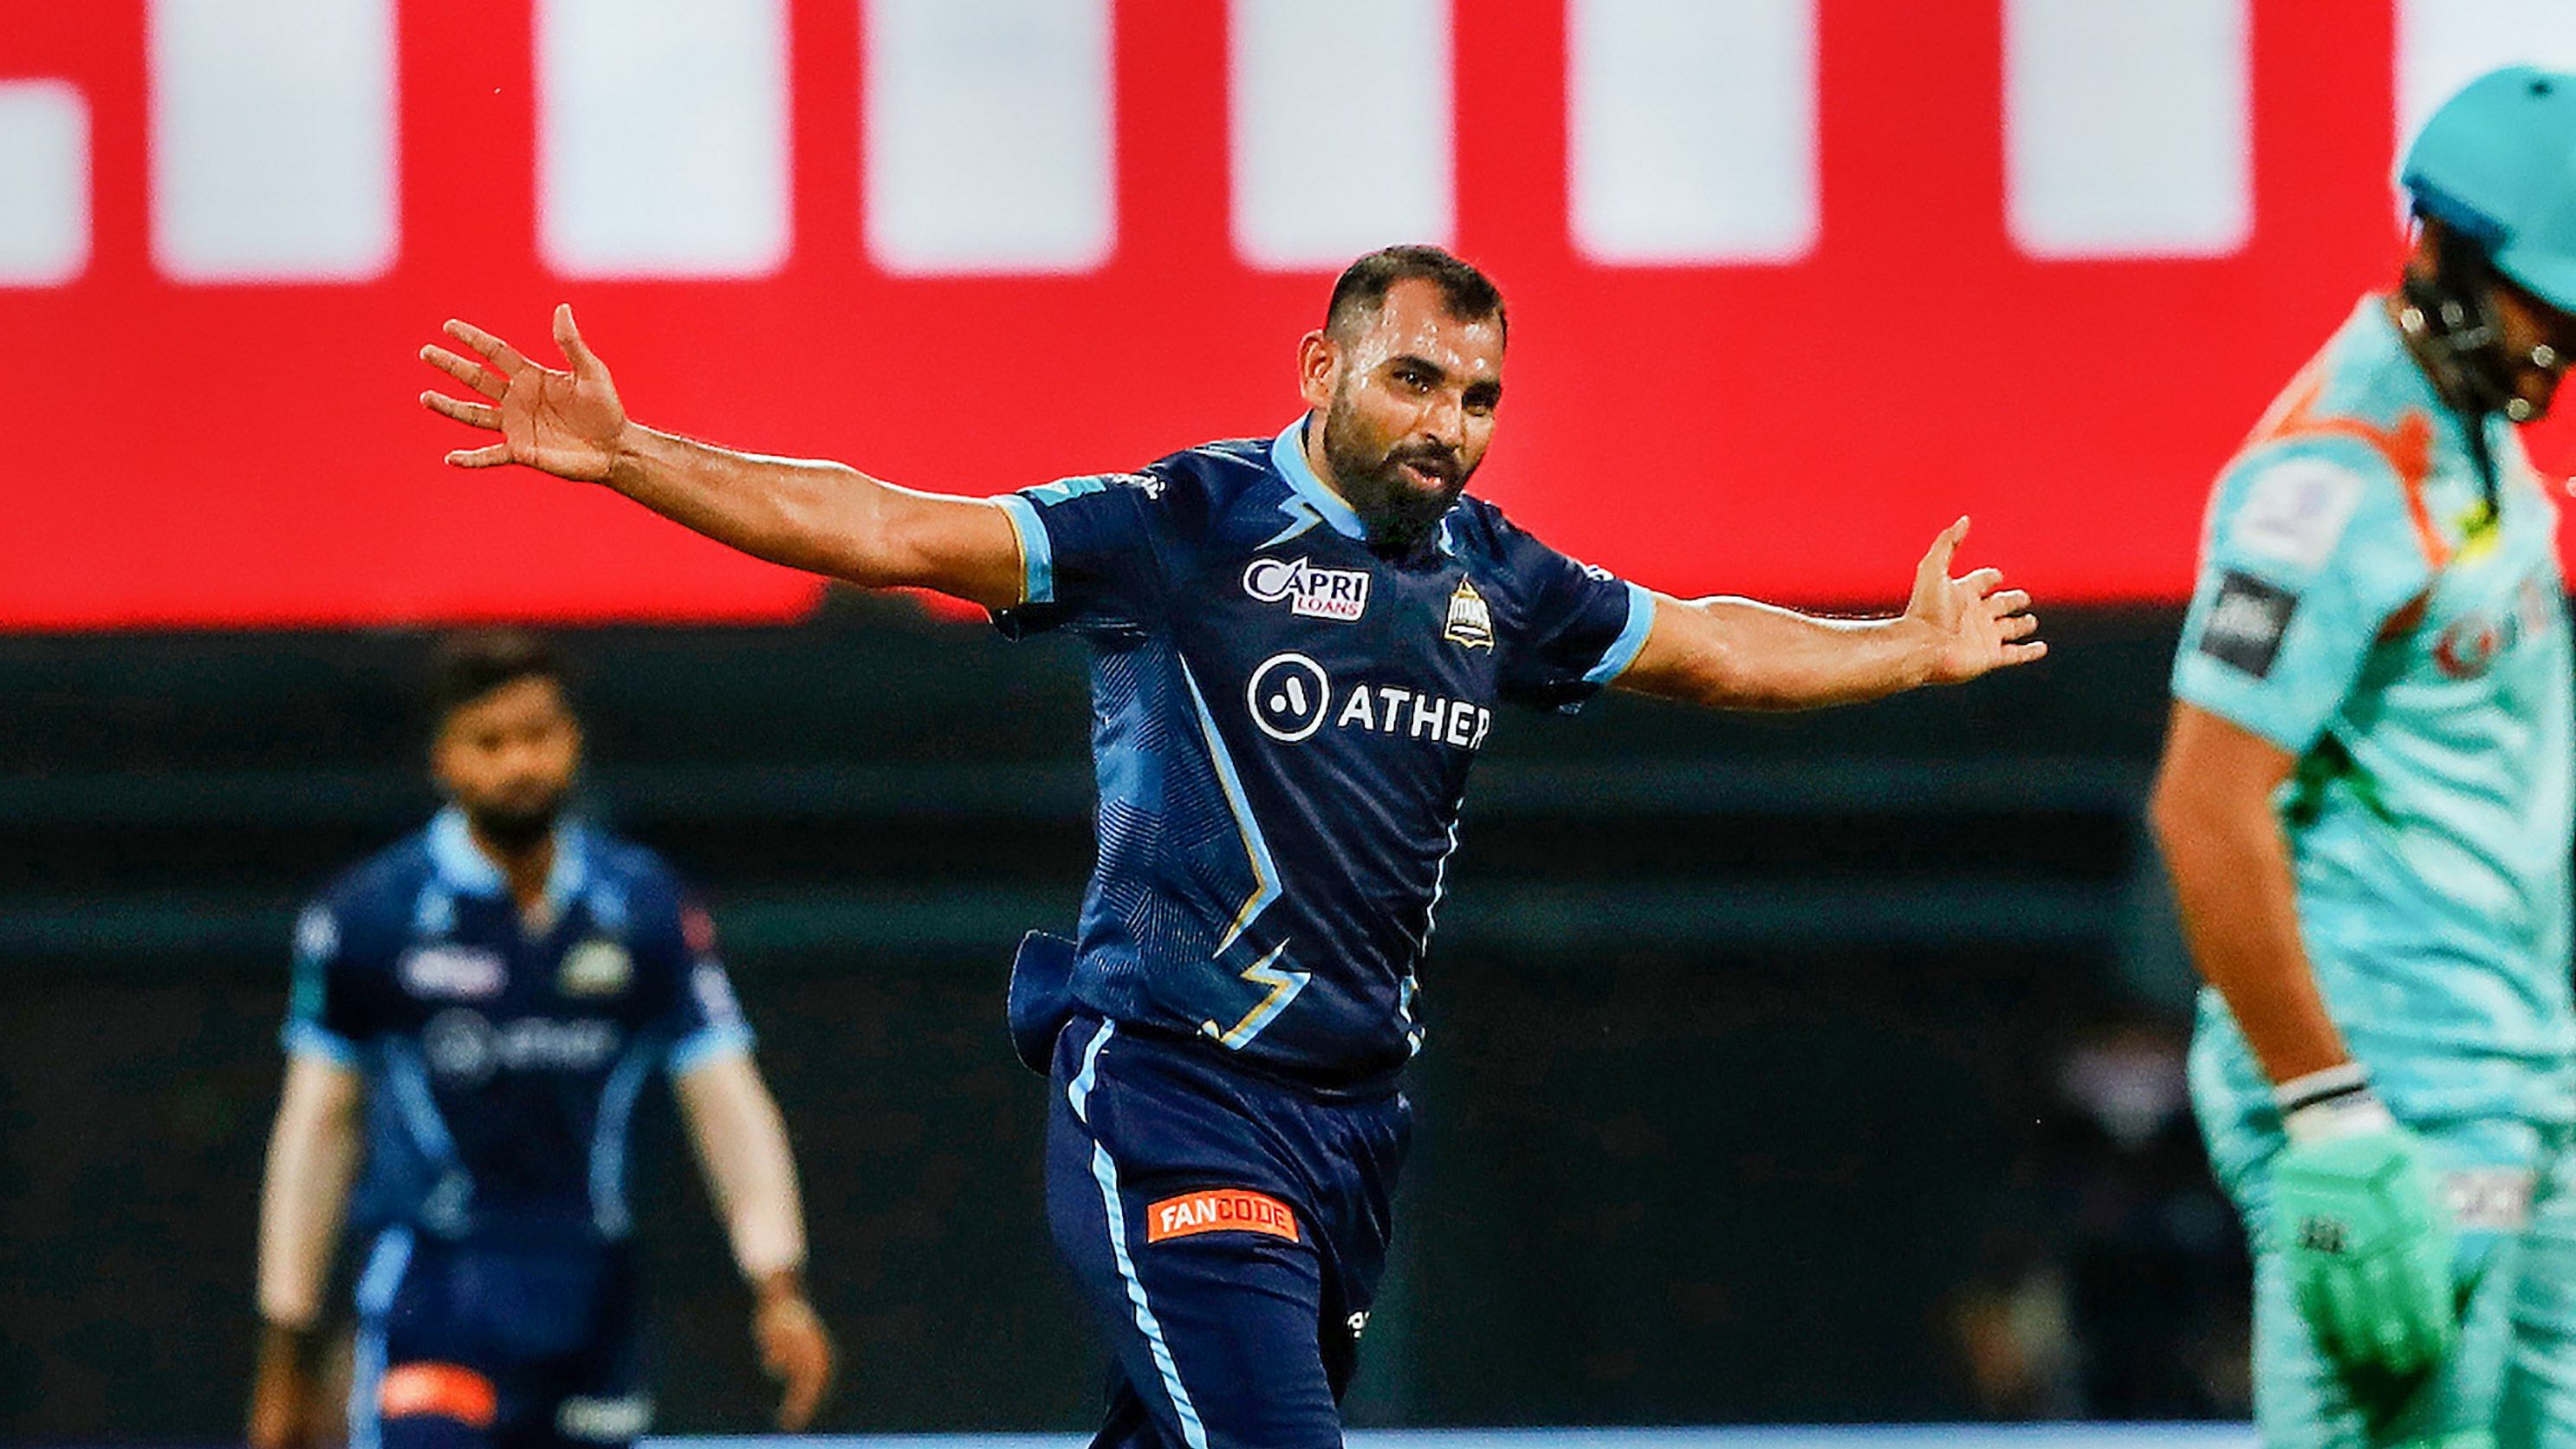 Before Monday's game, Shami had taken only 18 wickets bowling in the powerplay in IPL matches at an average of 59.94 in 139 overs. But on Monday, he was simply unplayable in powerplay. Credit: PTI Photo